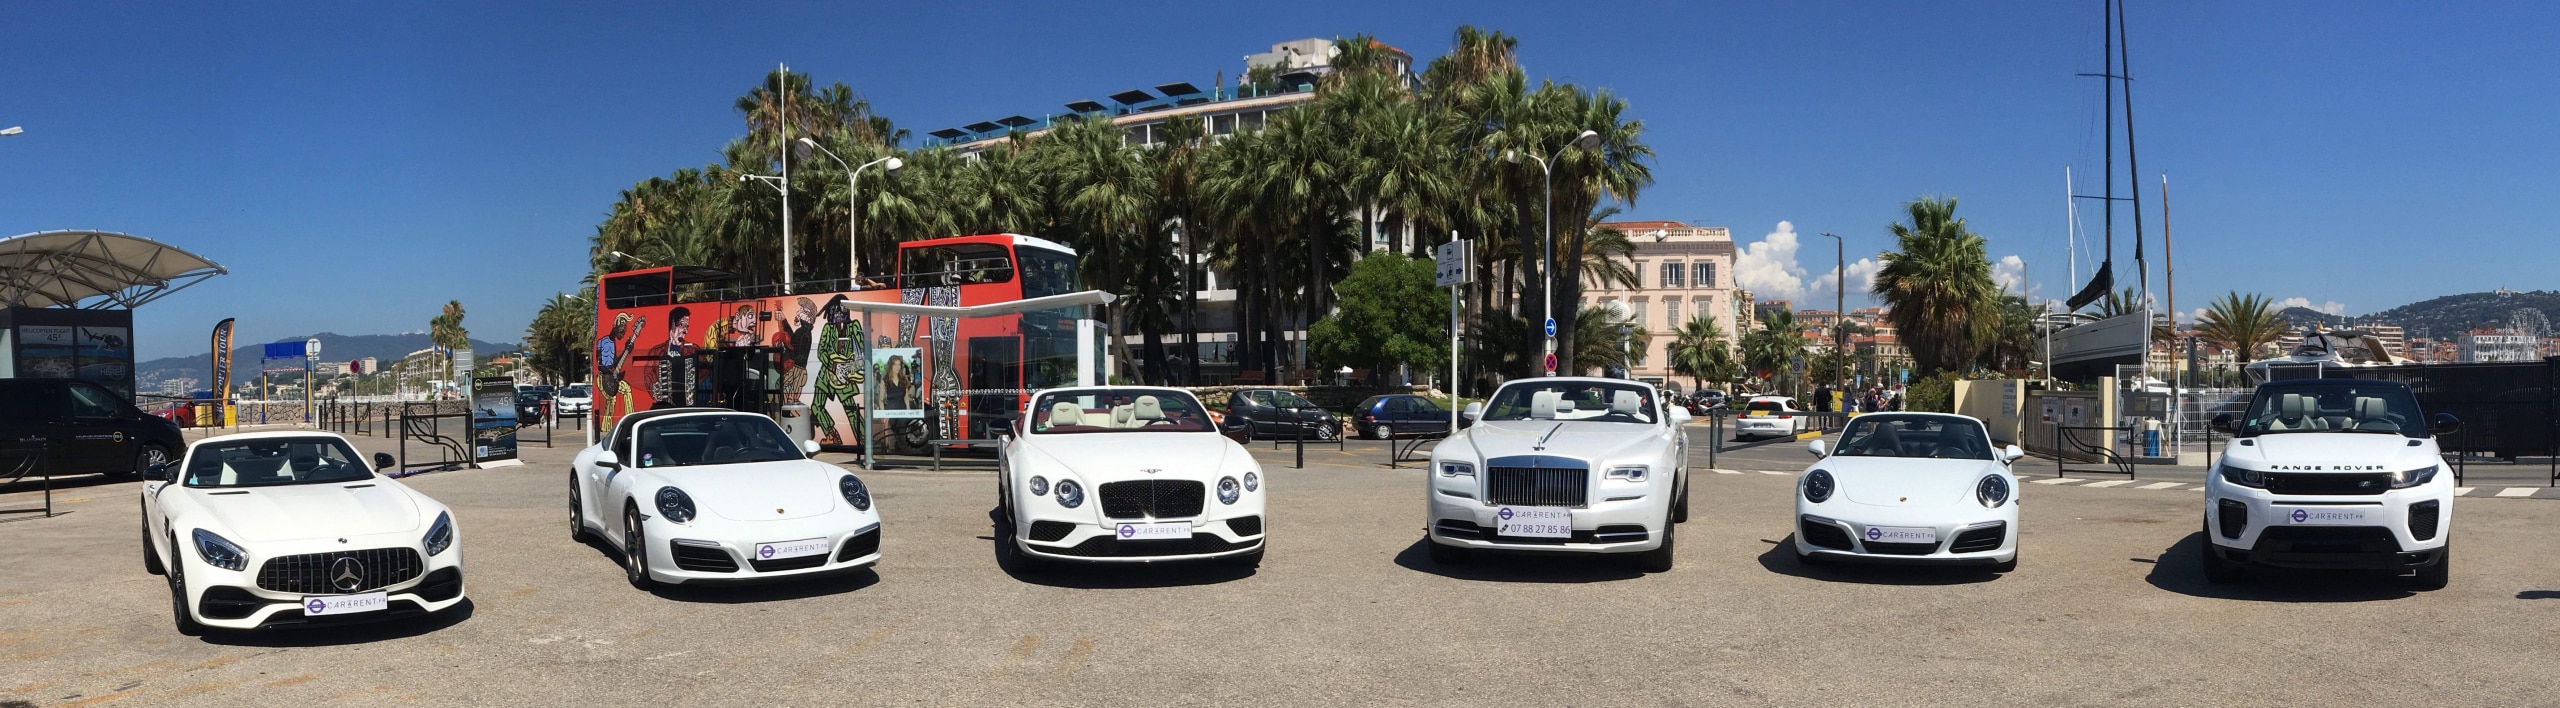 luxury car rental at Car4rent, White-collection-Car4rent-Cannes